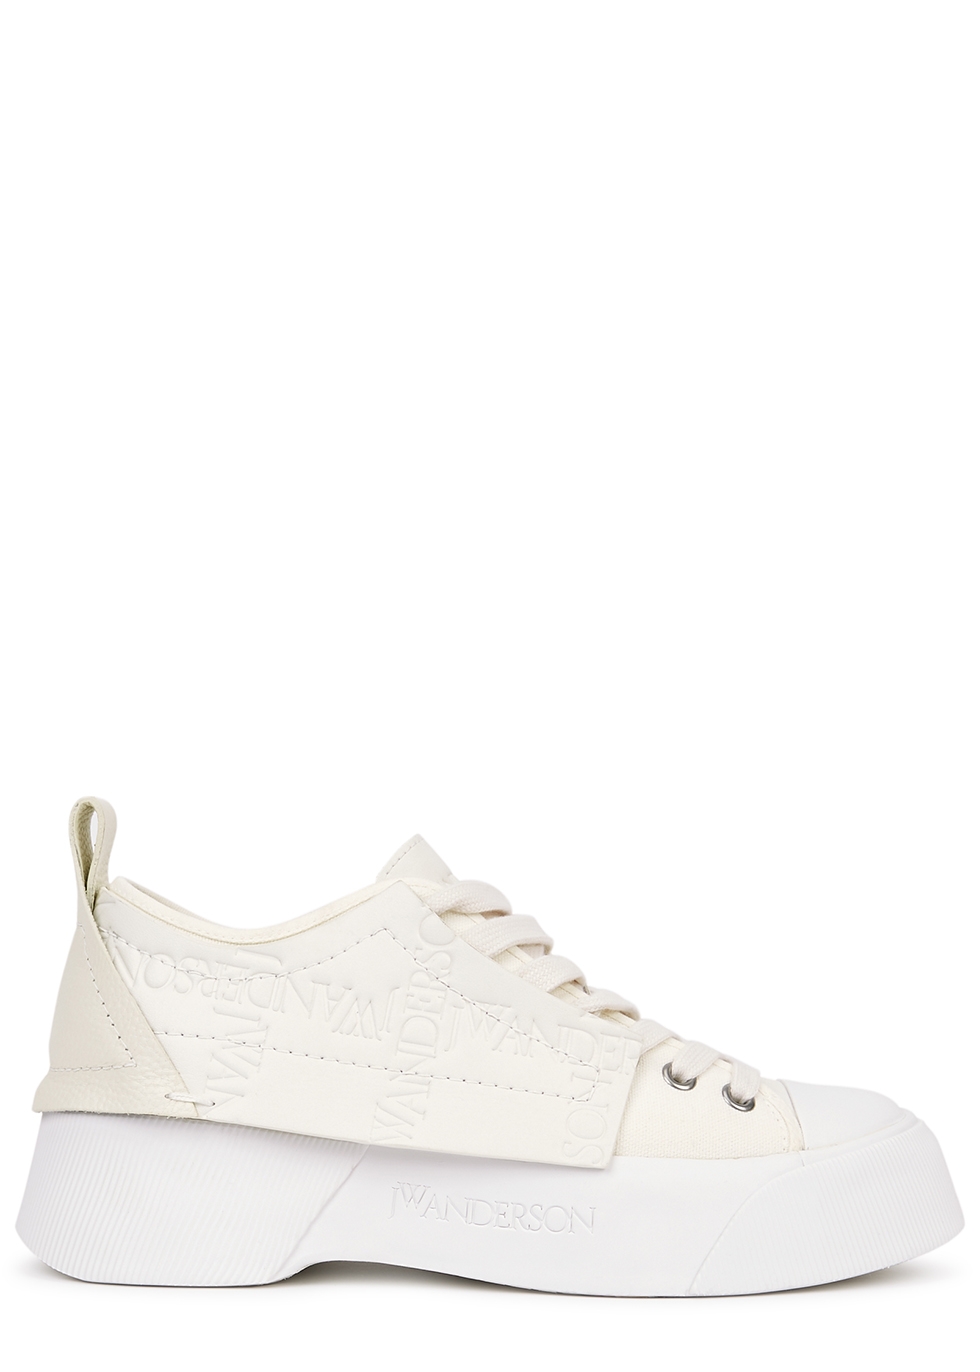 White panelled hi-top sneakers